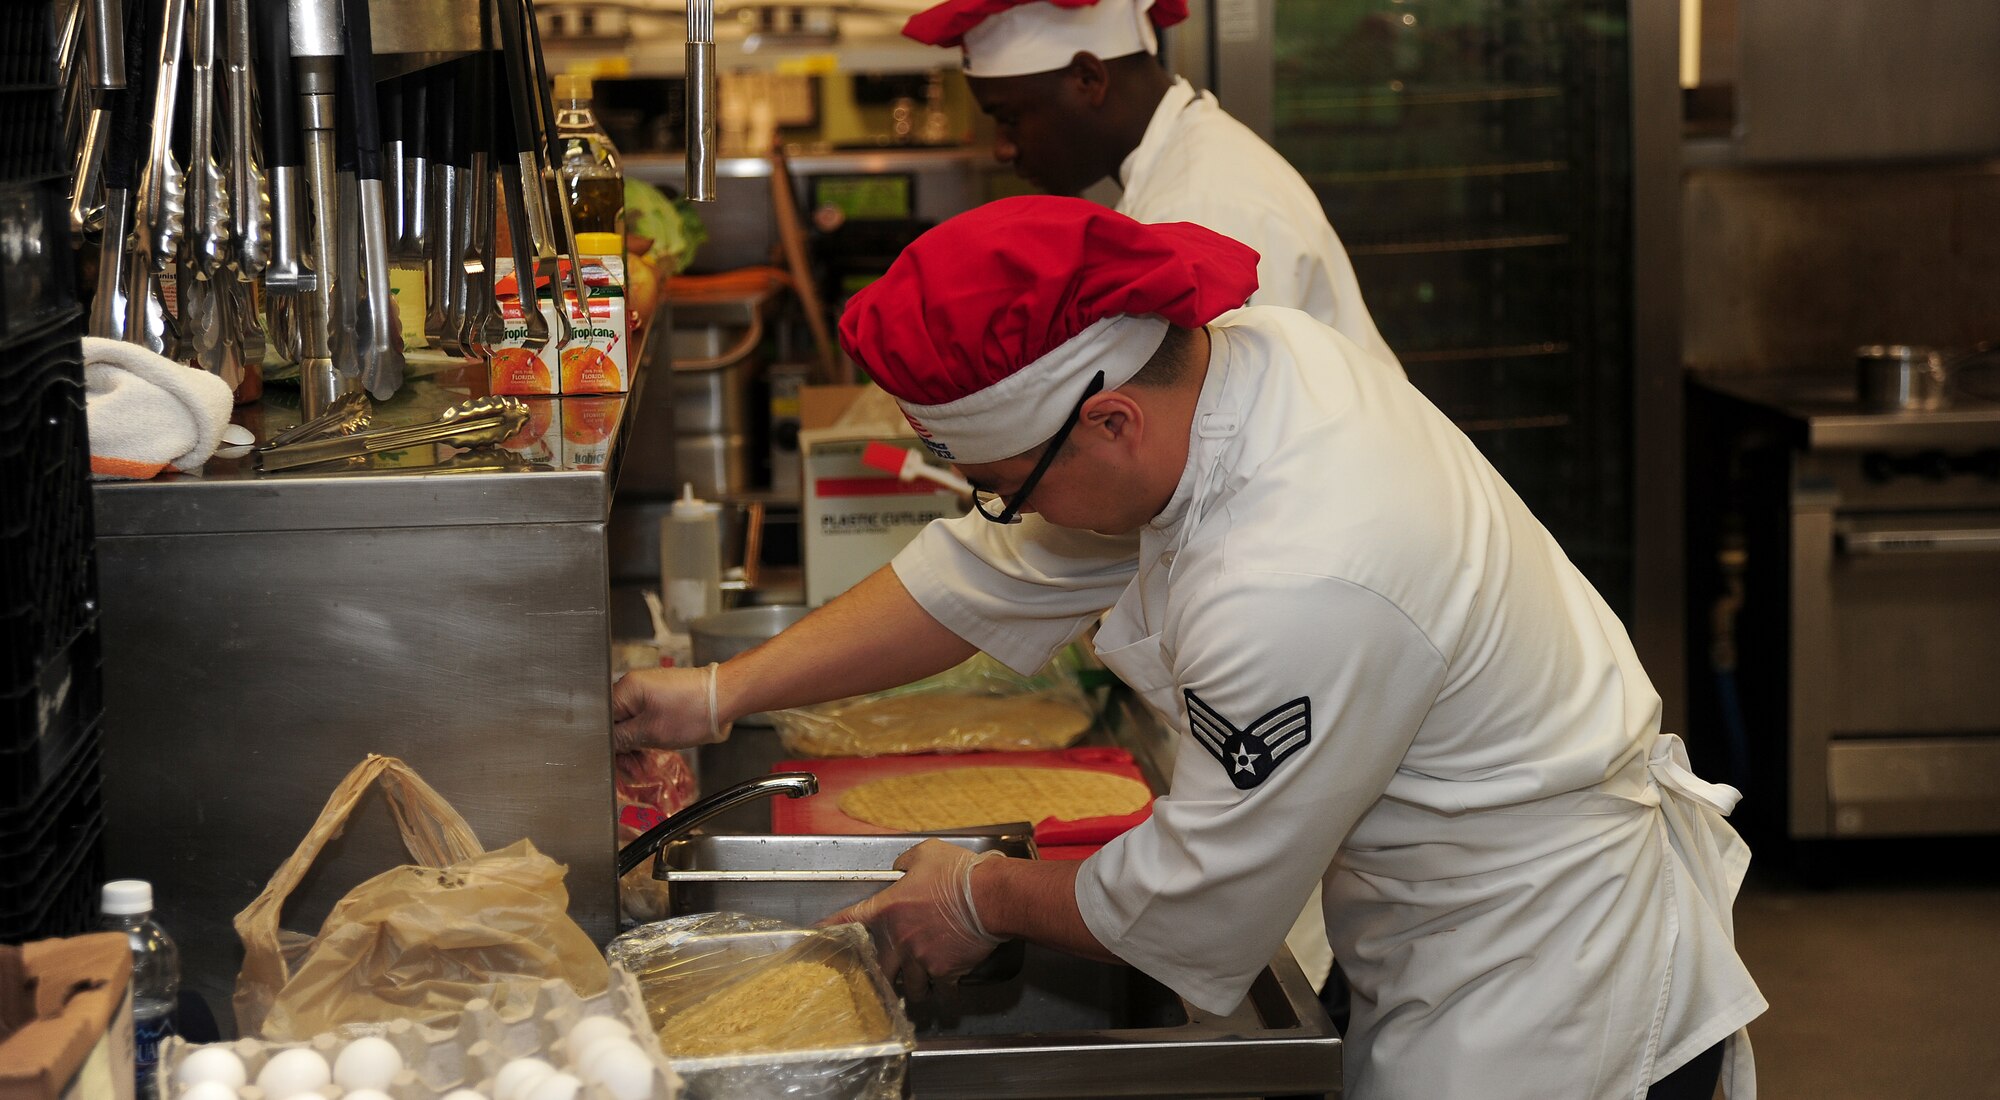 Senior Airman Rafael Hirao, a storeroom manager for the 509th Force Support Squadron, prepares for the red team’s main dish during the Global Strike Iron Chef Challenge at Whiteman Air Force Base, Mo., Sept. 4, 2015. The red team won the competition and will compete at the major command level at Barksdale AFB, La.
(U.S. Air Force photo by Airman 1st Class Jovan Banks/Released)
